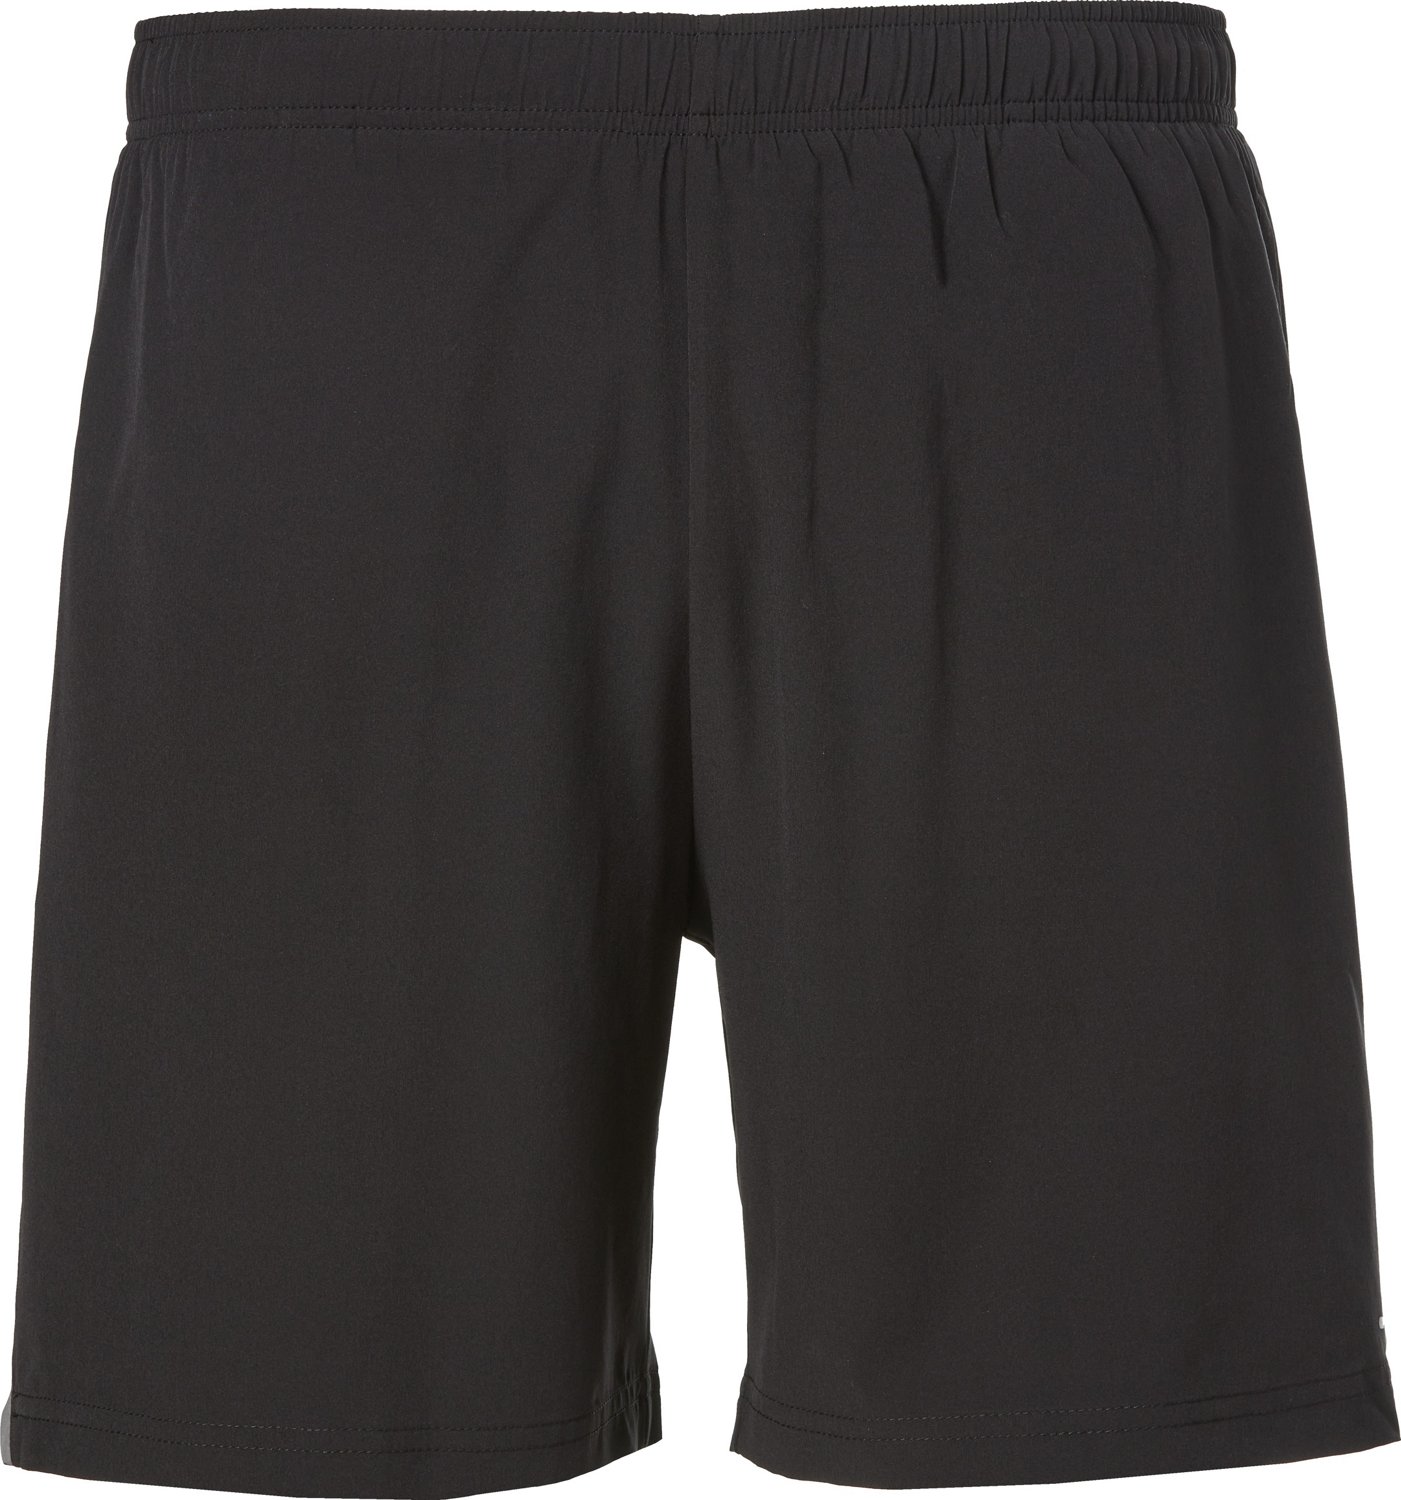 BCG Mens Running Shorts 7 in Academy | 10% off & Cash Back